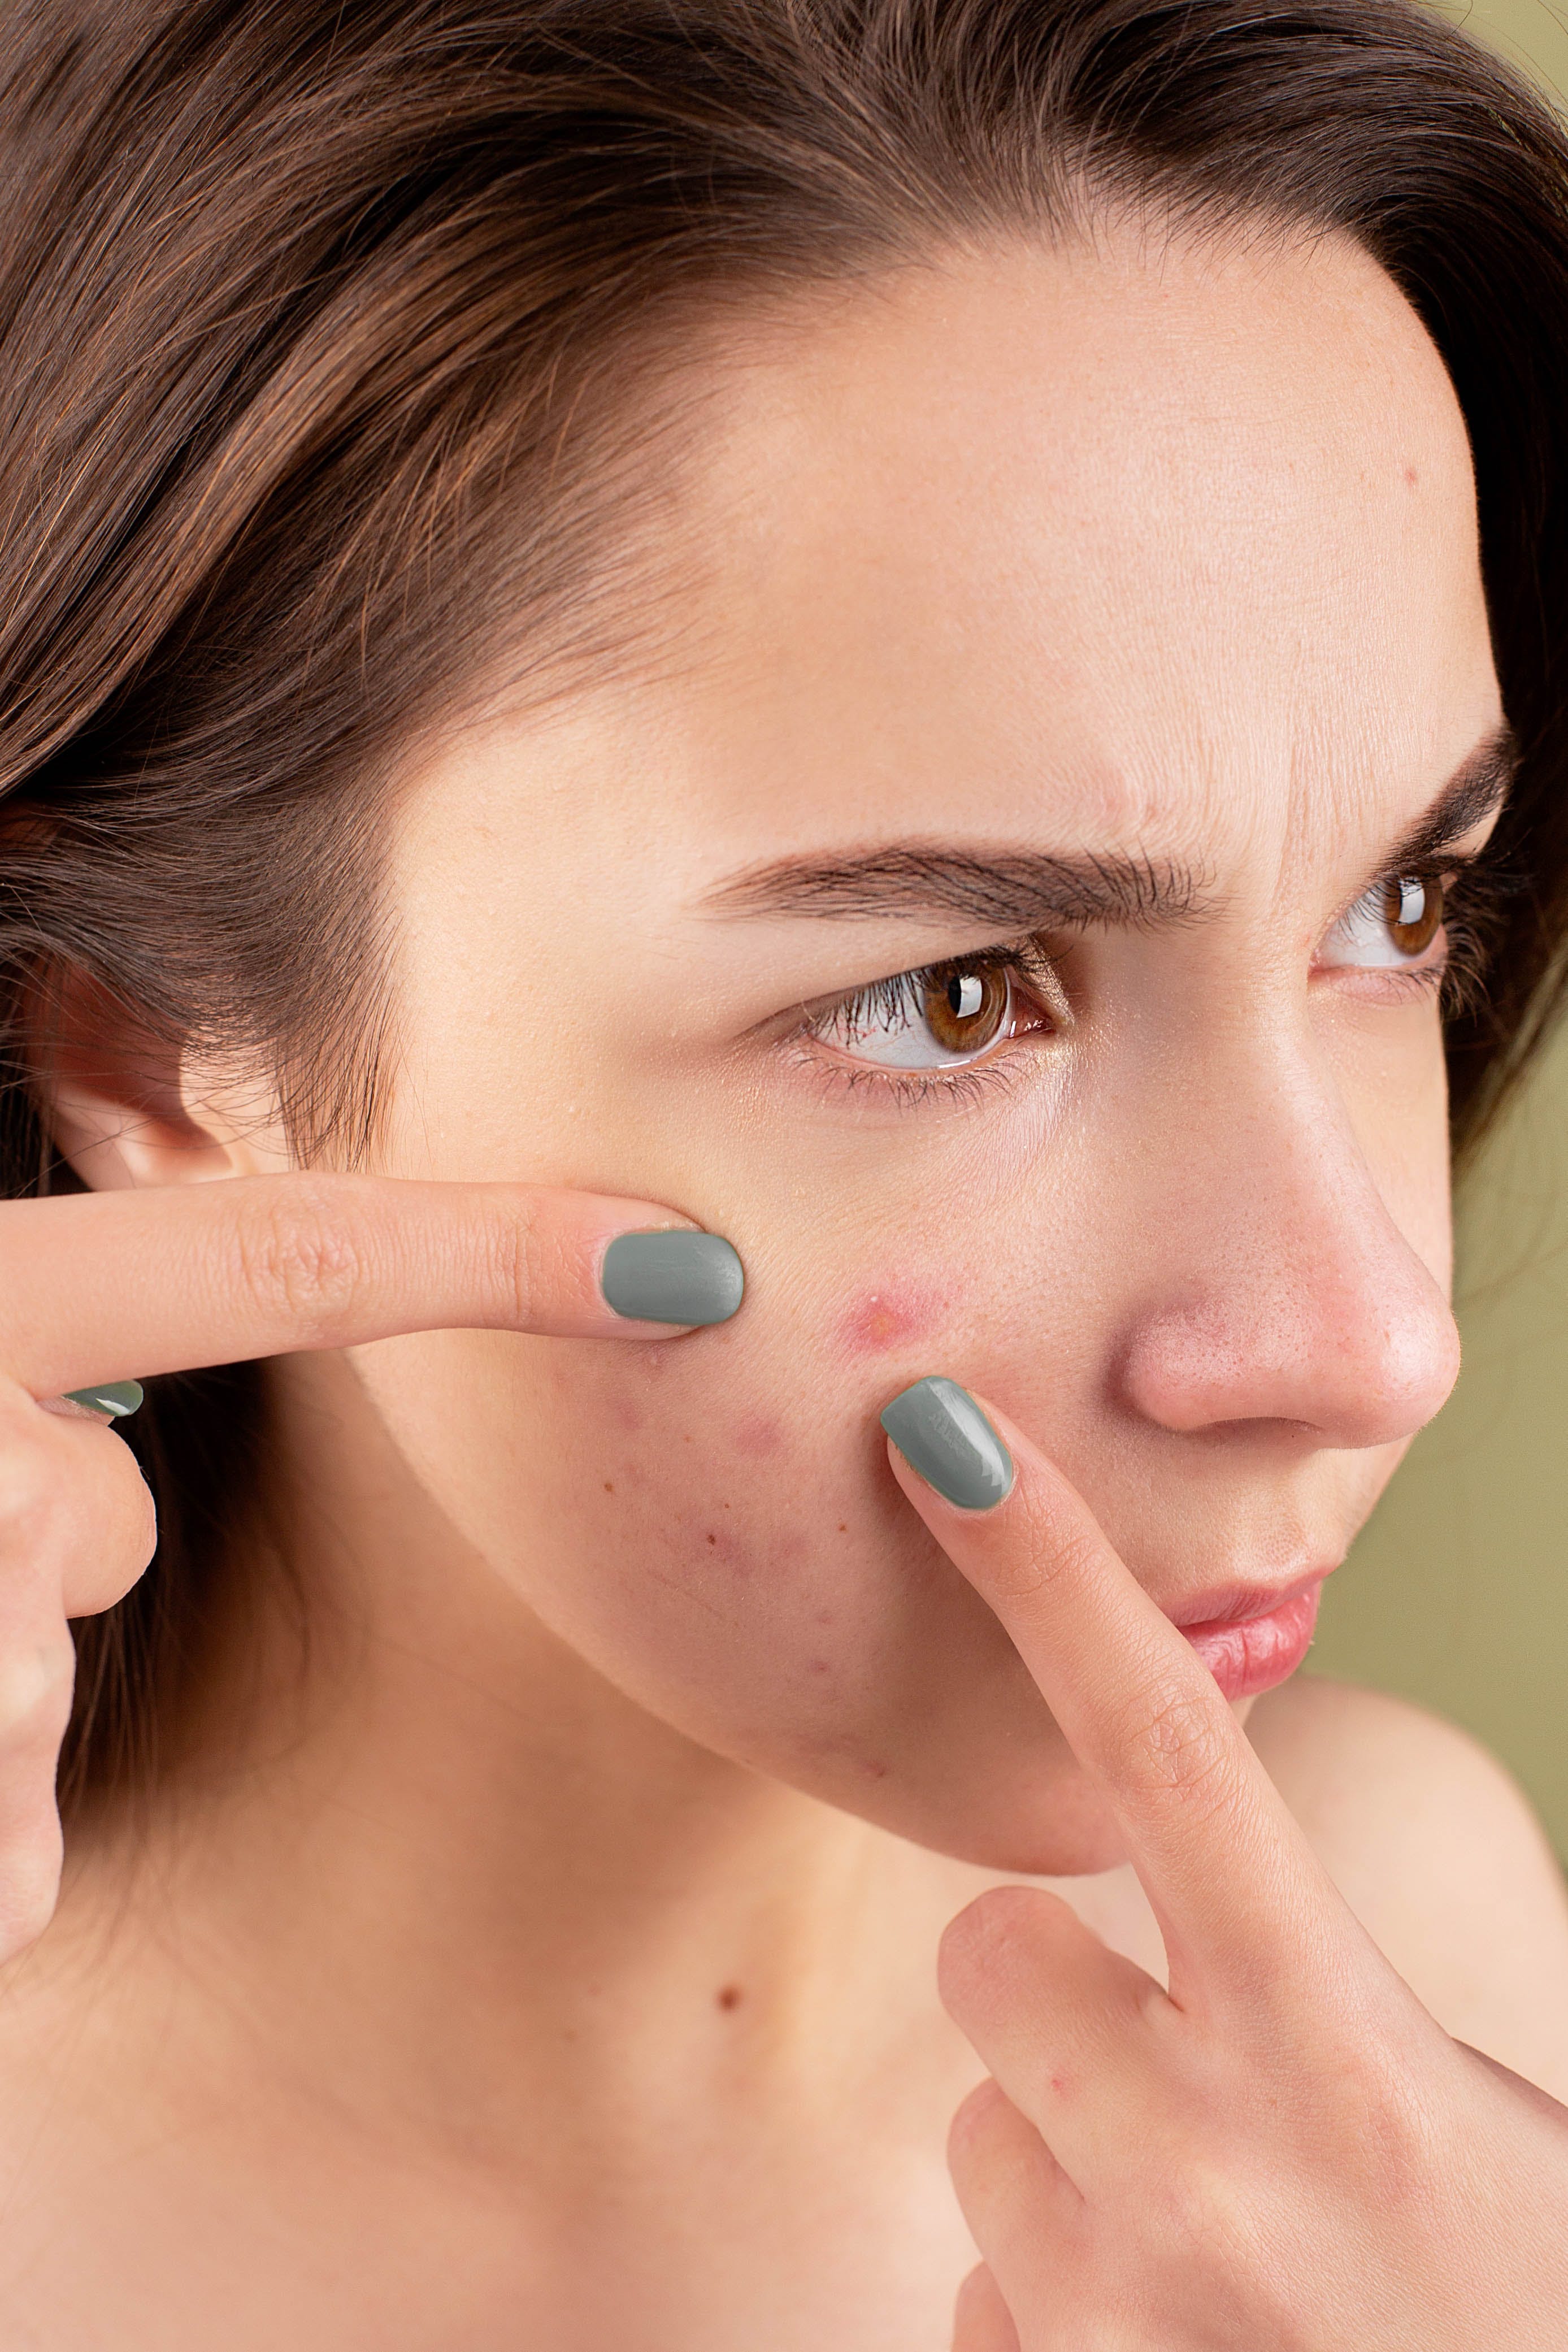 A lady squizing a pimple on her face: Source: Pexels